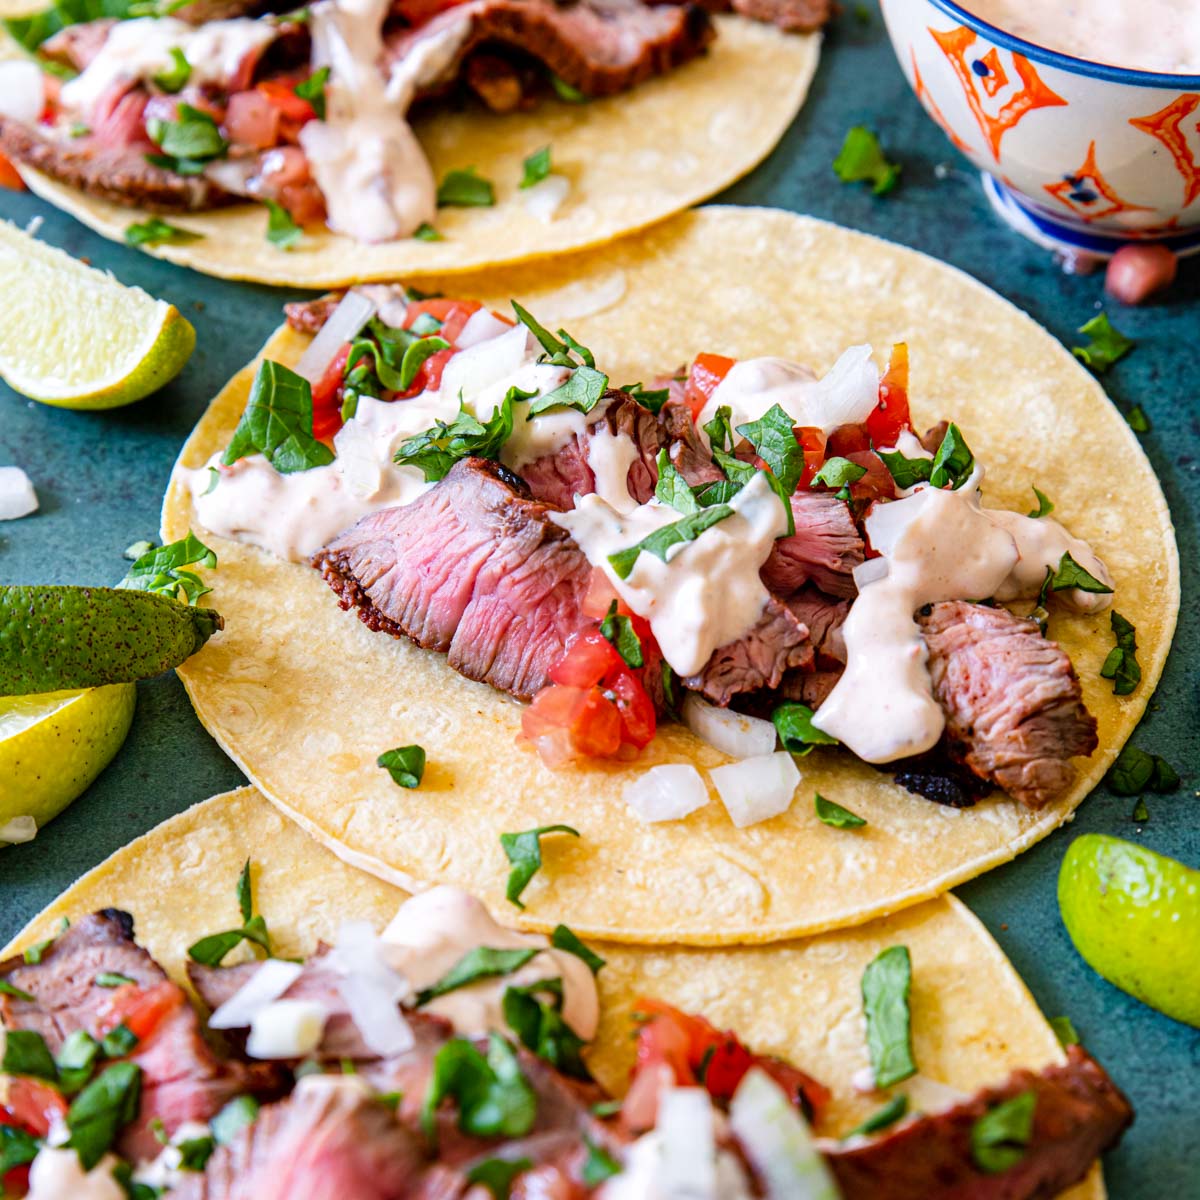 Grilled Steak Tacos assembled with pico de gallo and chipotle crema